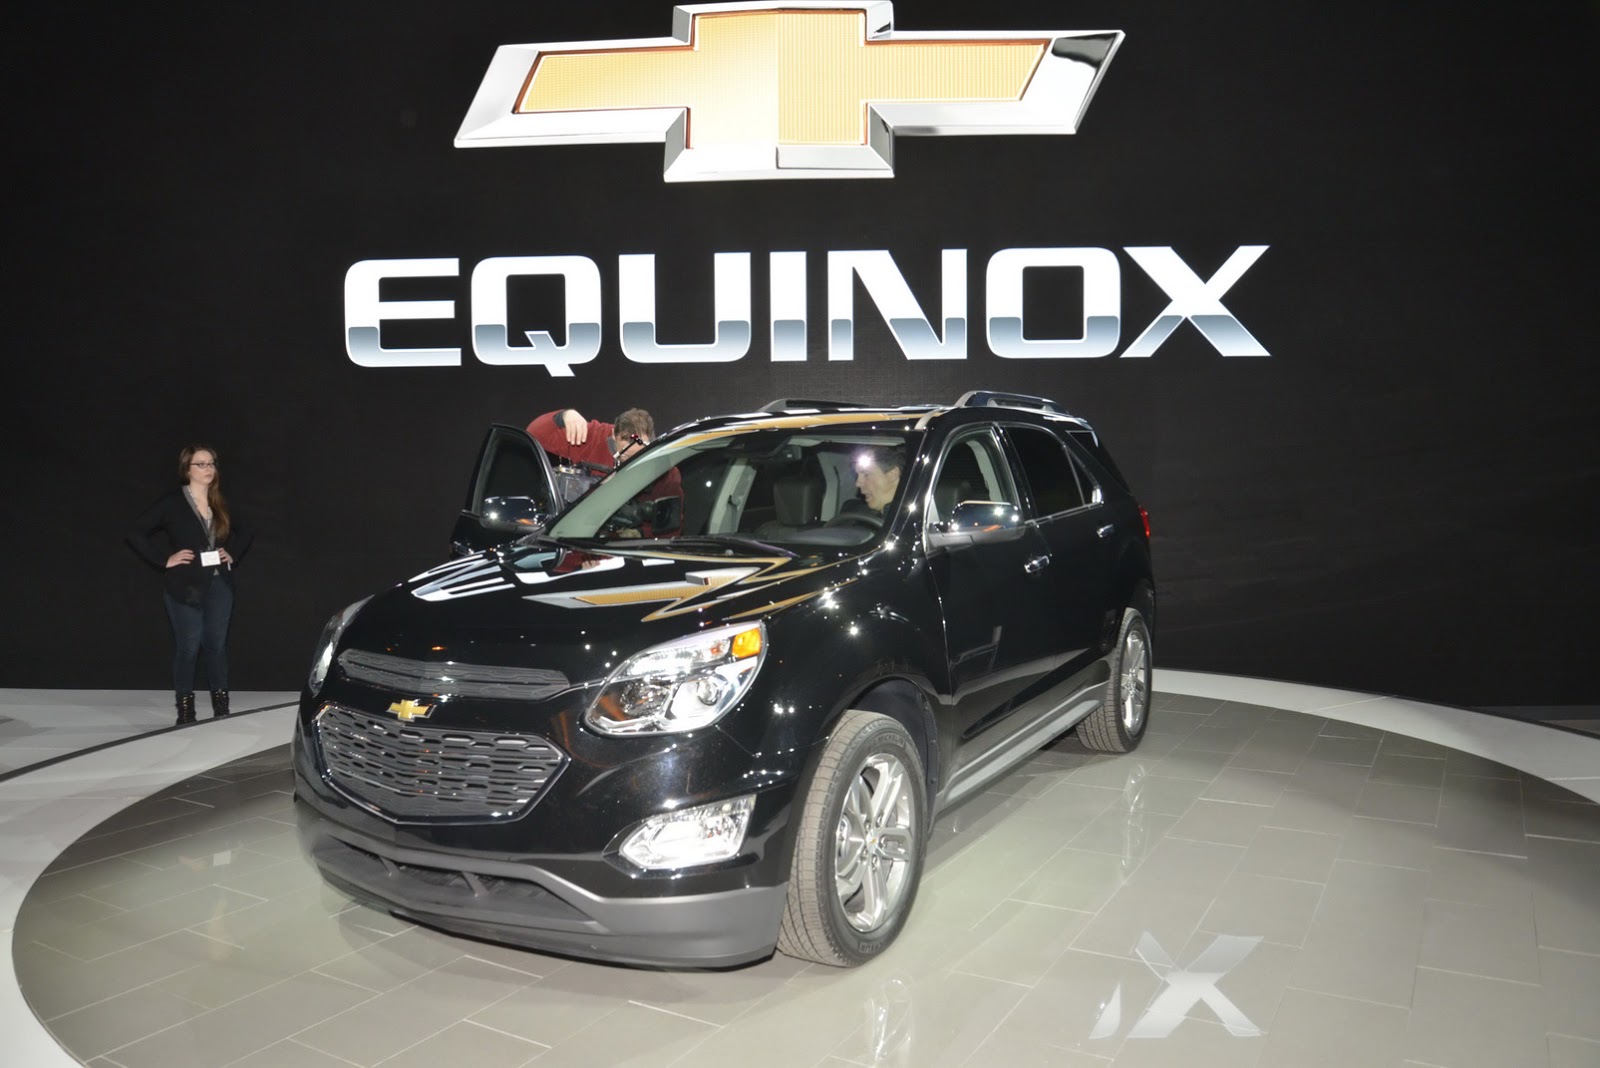 pictures of 2016 equinox